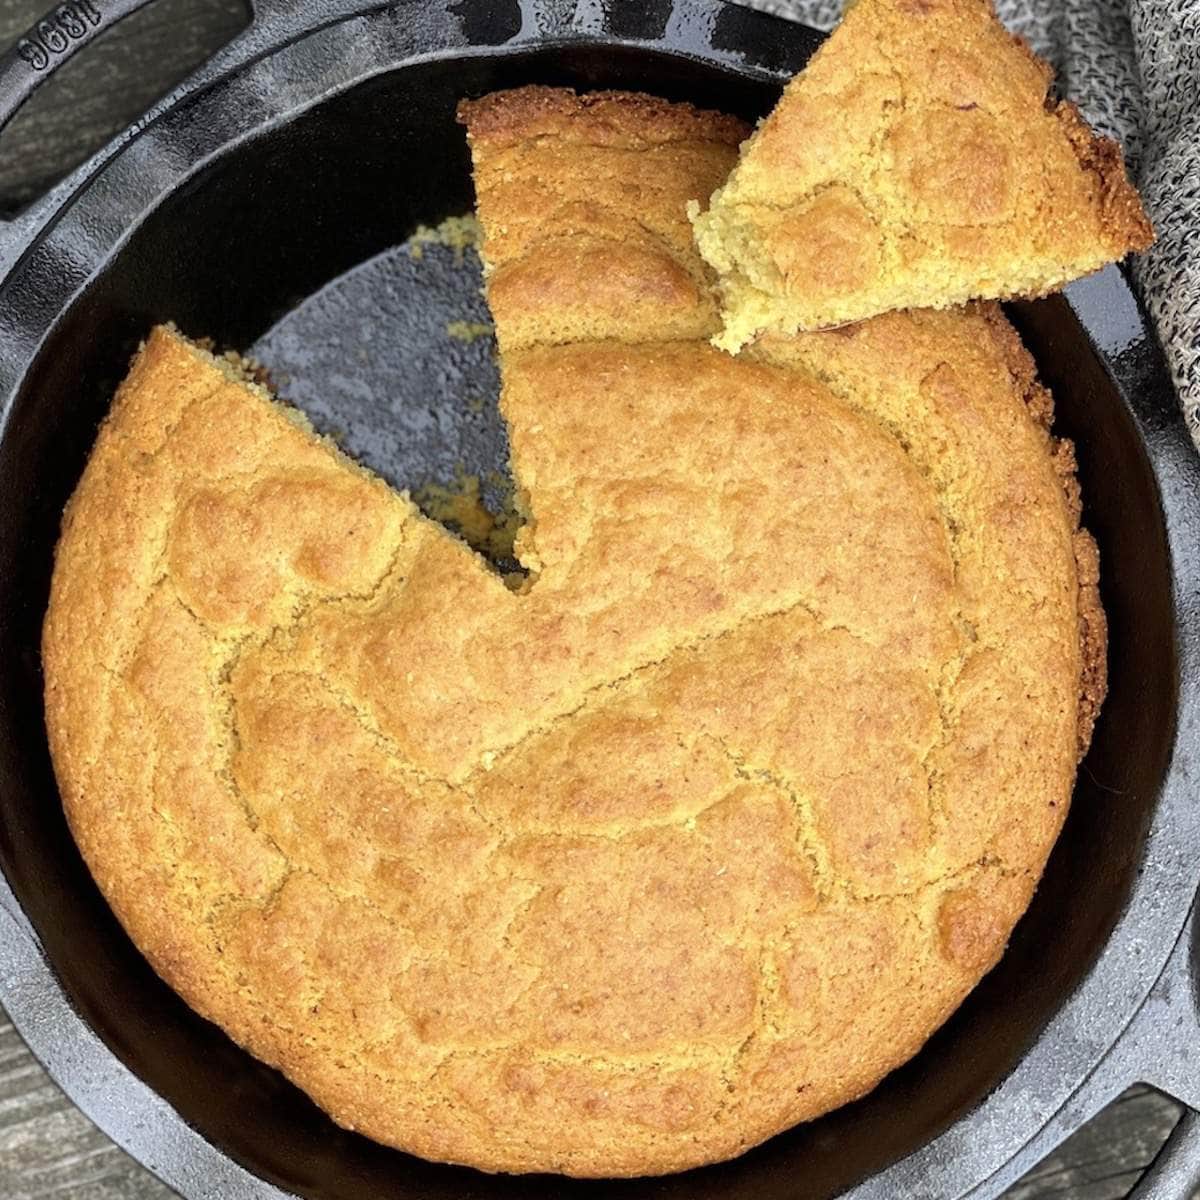 https://southern-bytes.com/wp-content/uploads/2022/05/easy-southern-cornbread-in-a-pie-pan.jpeg